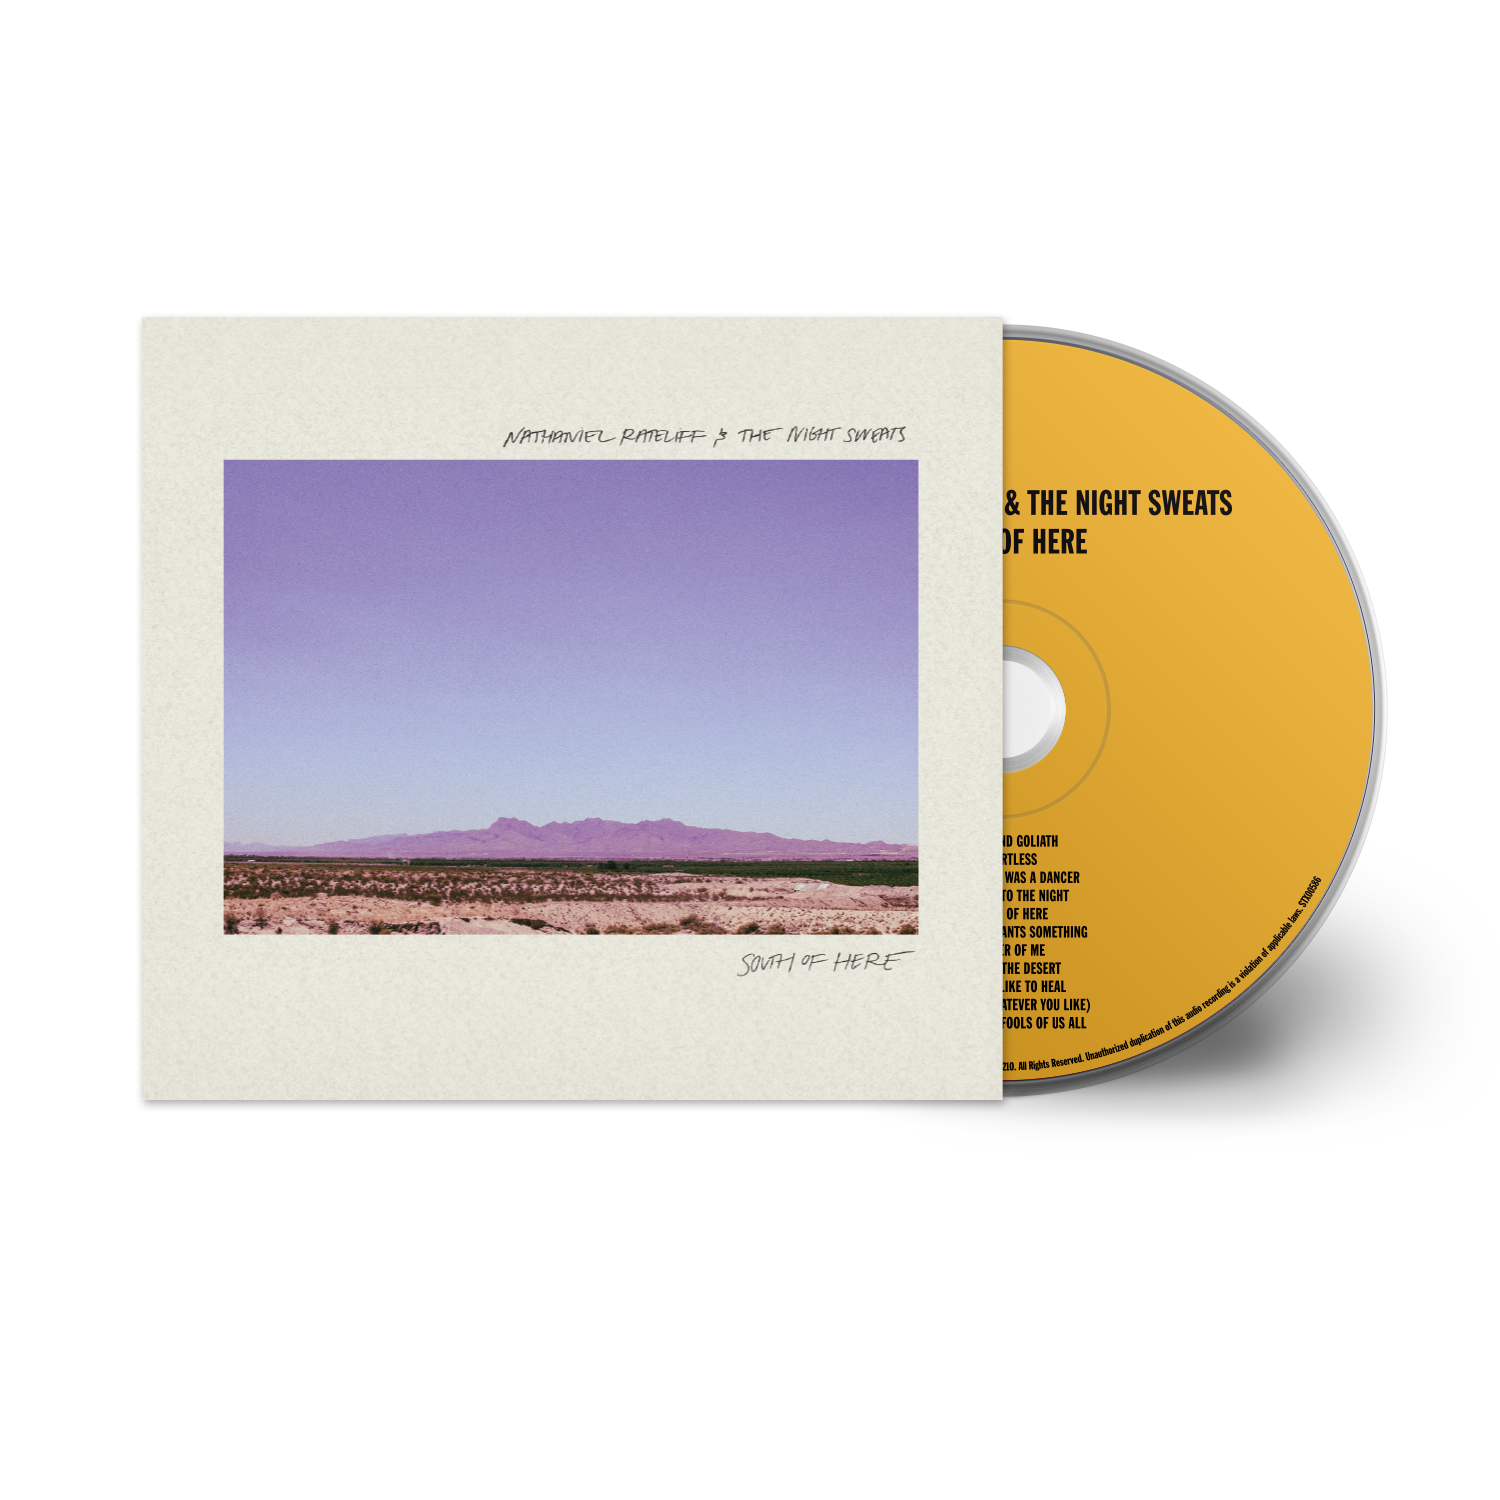 South of Here: CD